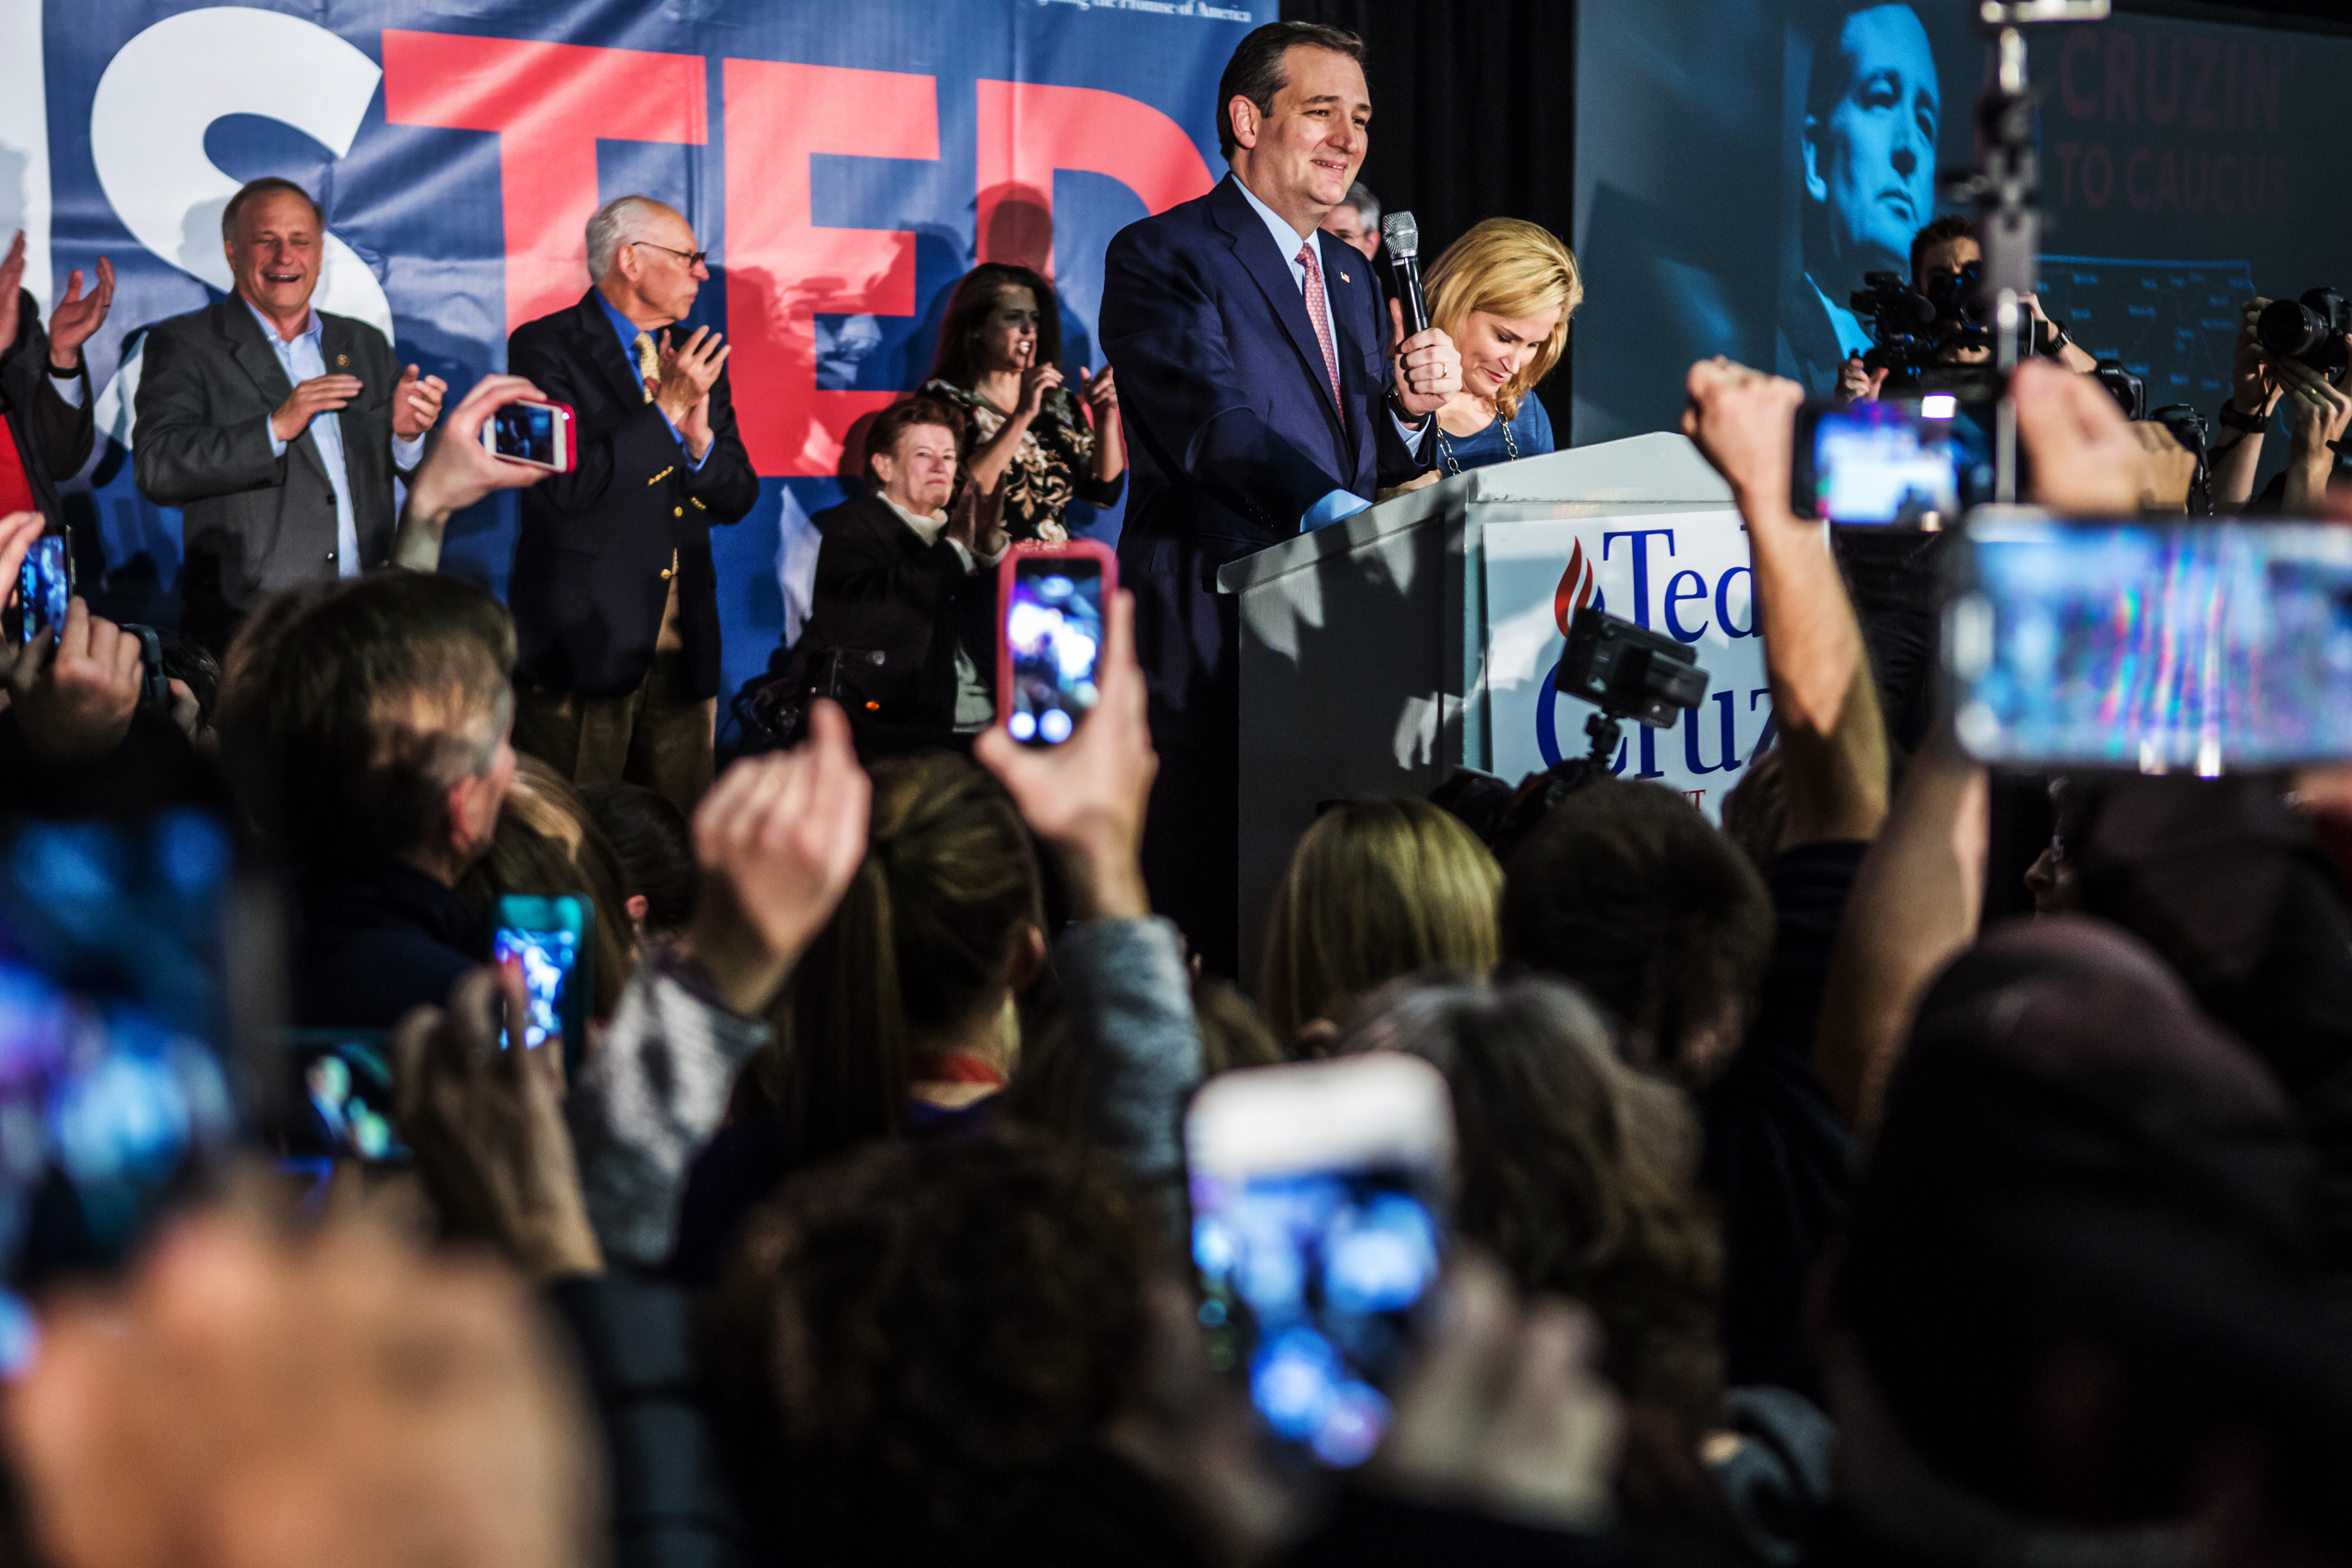 Republican presidential candidate Sen. Ted Cruz, r-TX, joined by his wife Heidi Cruz, speaks at a caucus night rally in Des Moines, Iowa, on Feb. 1, 2016. (Brendan Hoffman—Getty Images)